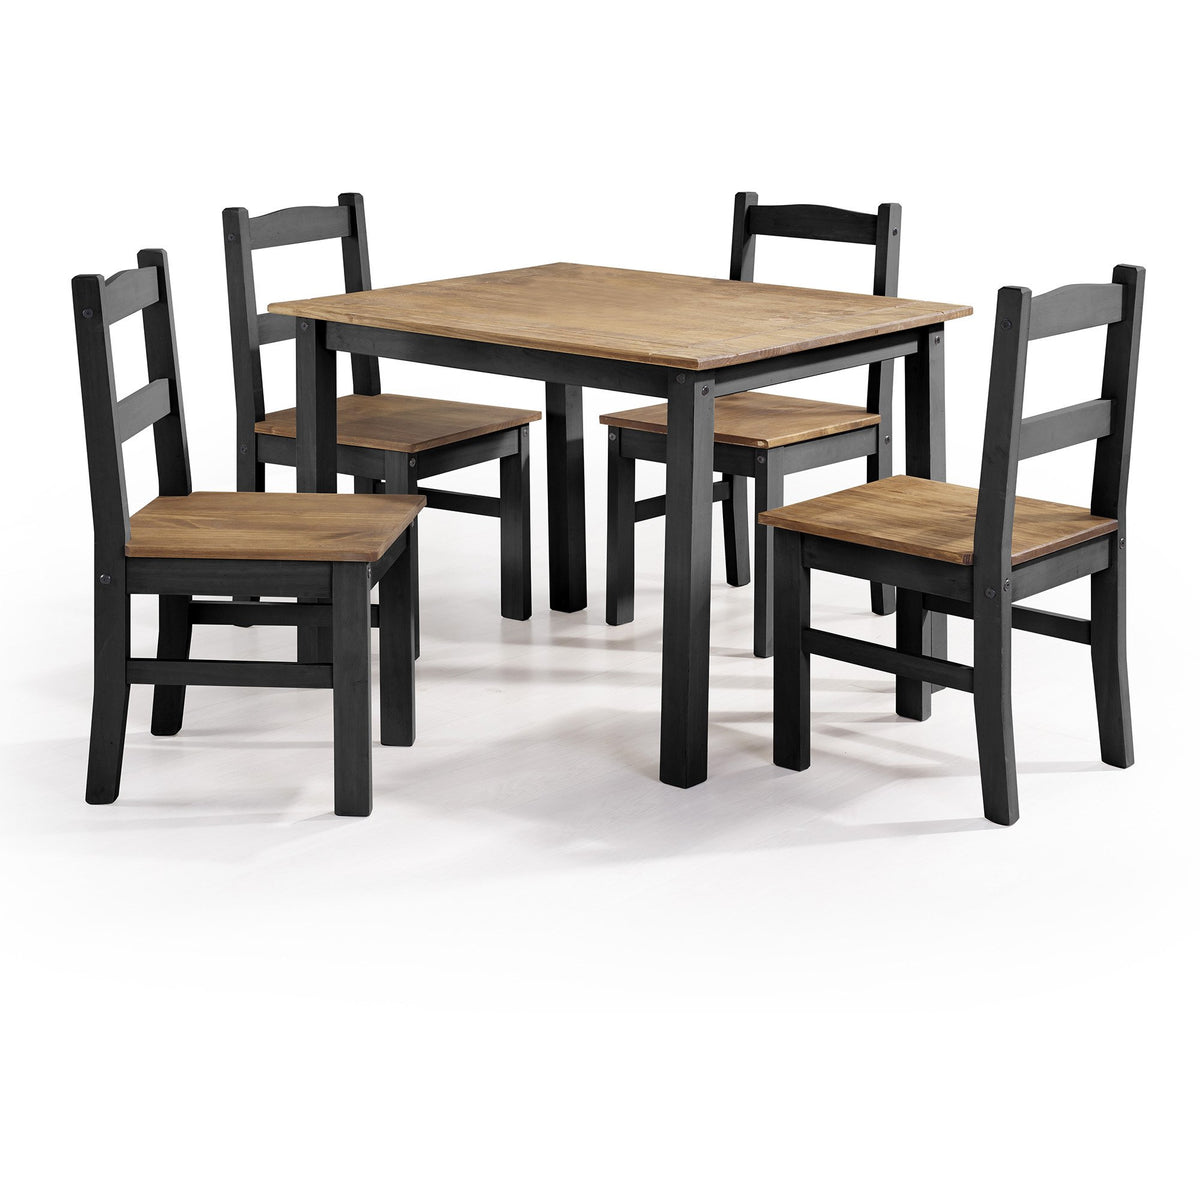 Manhattan Comfort York 5-Piece Solid Wood Dining Set with 1 Table and 4 Chairs in Black Wash-Minimal & Modern